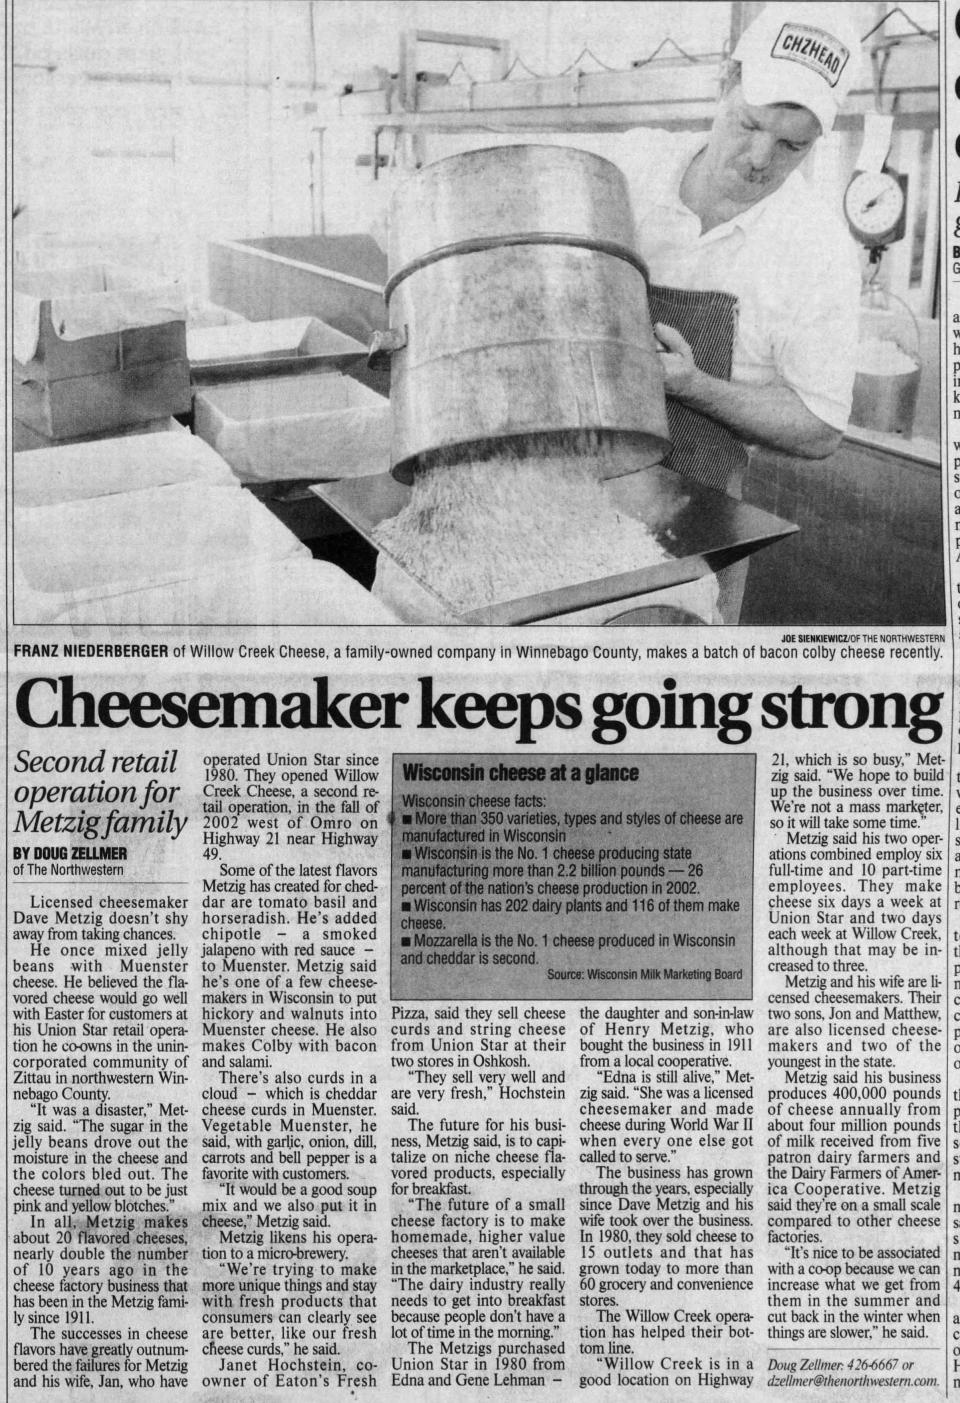 A May 16, 2004, article in the Oshkosh Northwestern shares the opening of Willow Creek Cheese Factory, Union Star's second location. At the time, Dave Metzig estimated the business produced "400,000 pounds of cheese annually, from about four million pounds of milk."